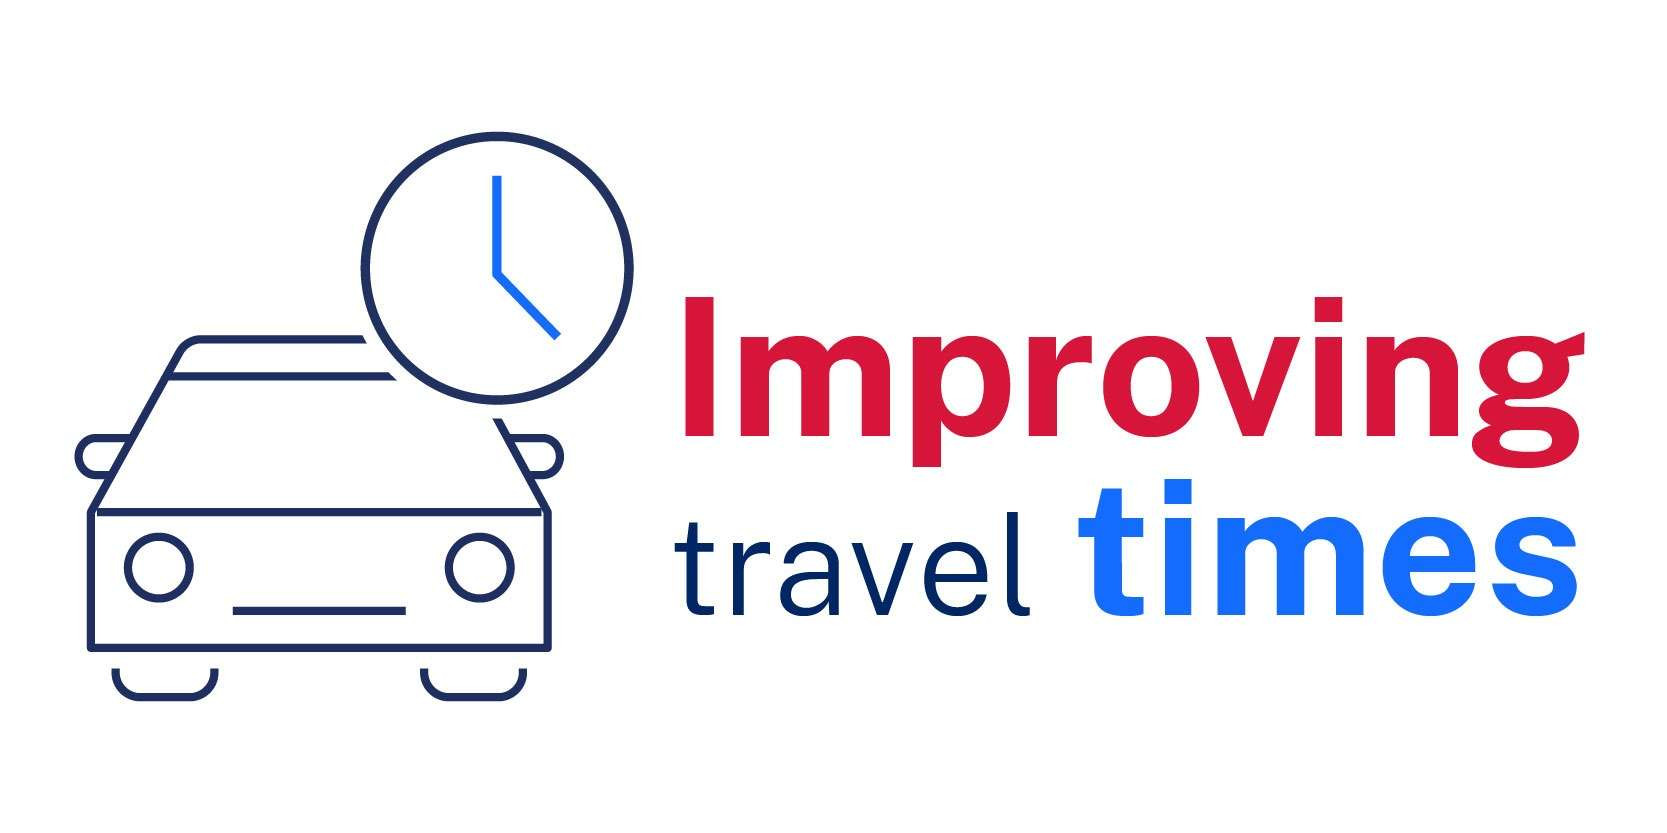 220620_M6S1-220616-icons_improving travel times